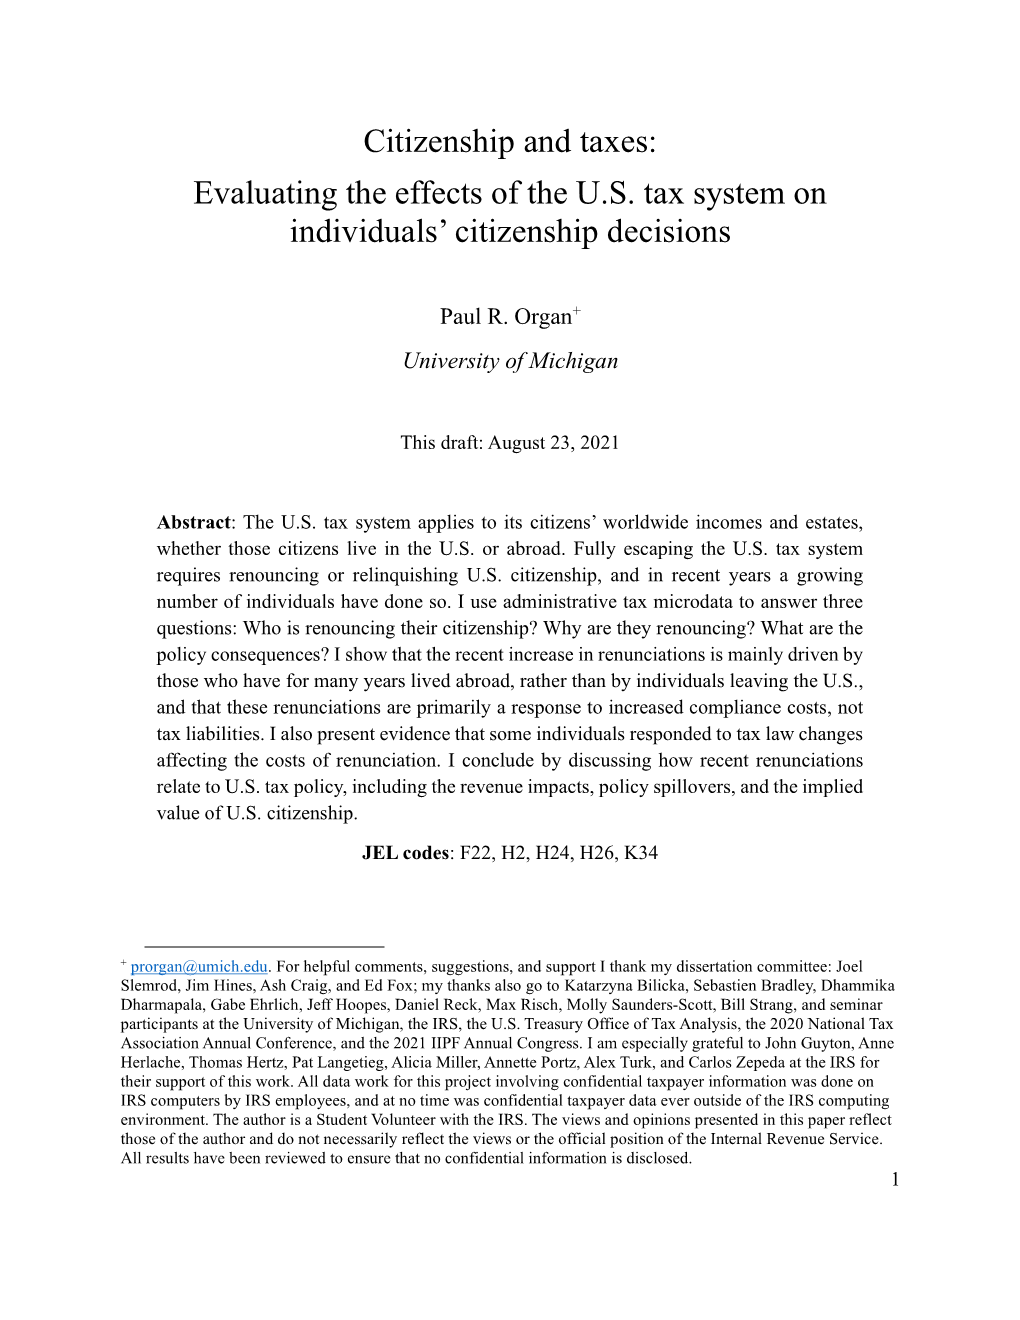 Citizenship and Taxes: Evaluating the Effects of the U.S. Tax System on Individuals’ Citizenship Decisions